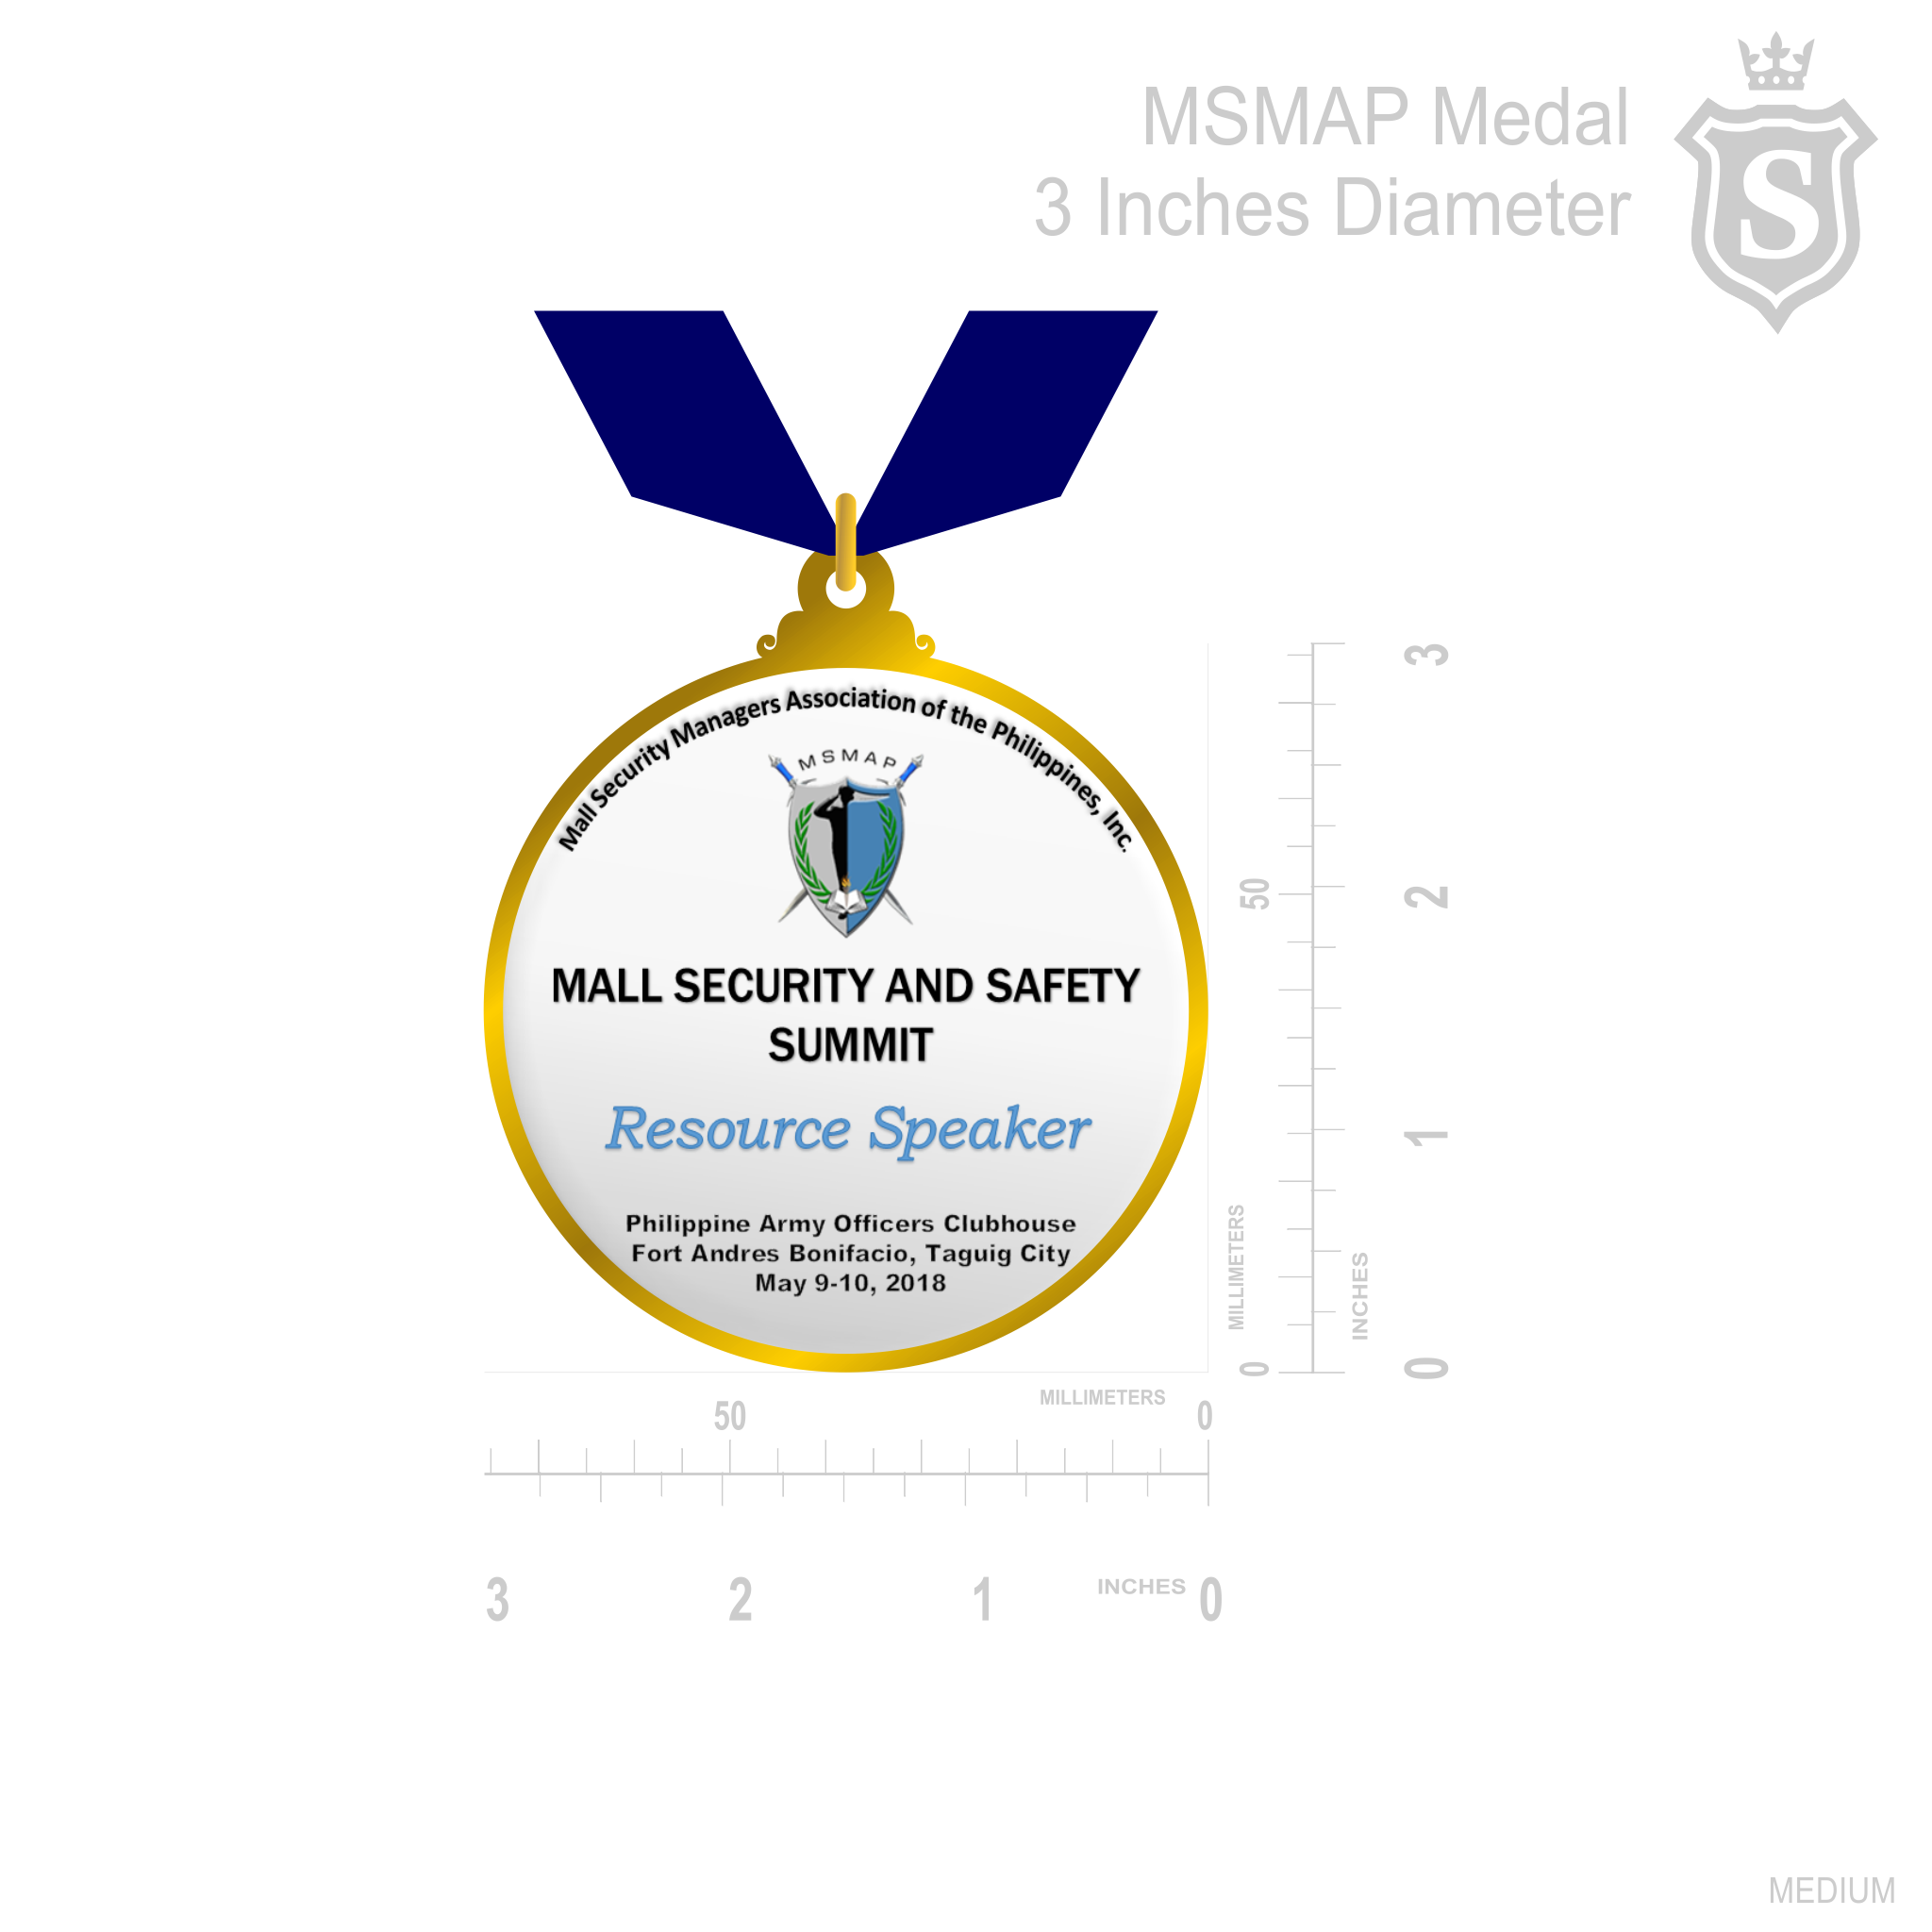 Mall Security Management Association of the Philippines (MSMAP) Medal - PSA-SG